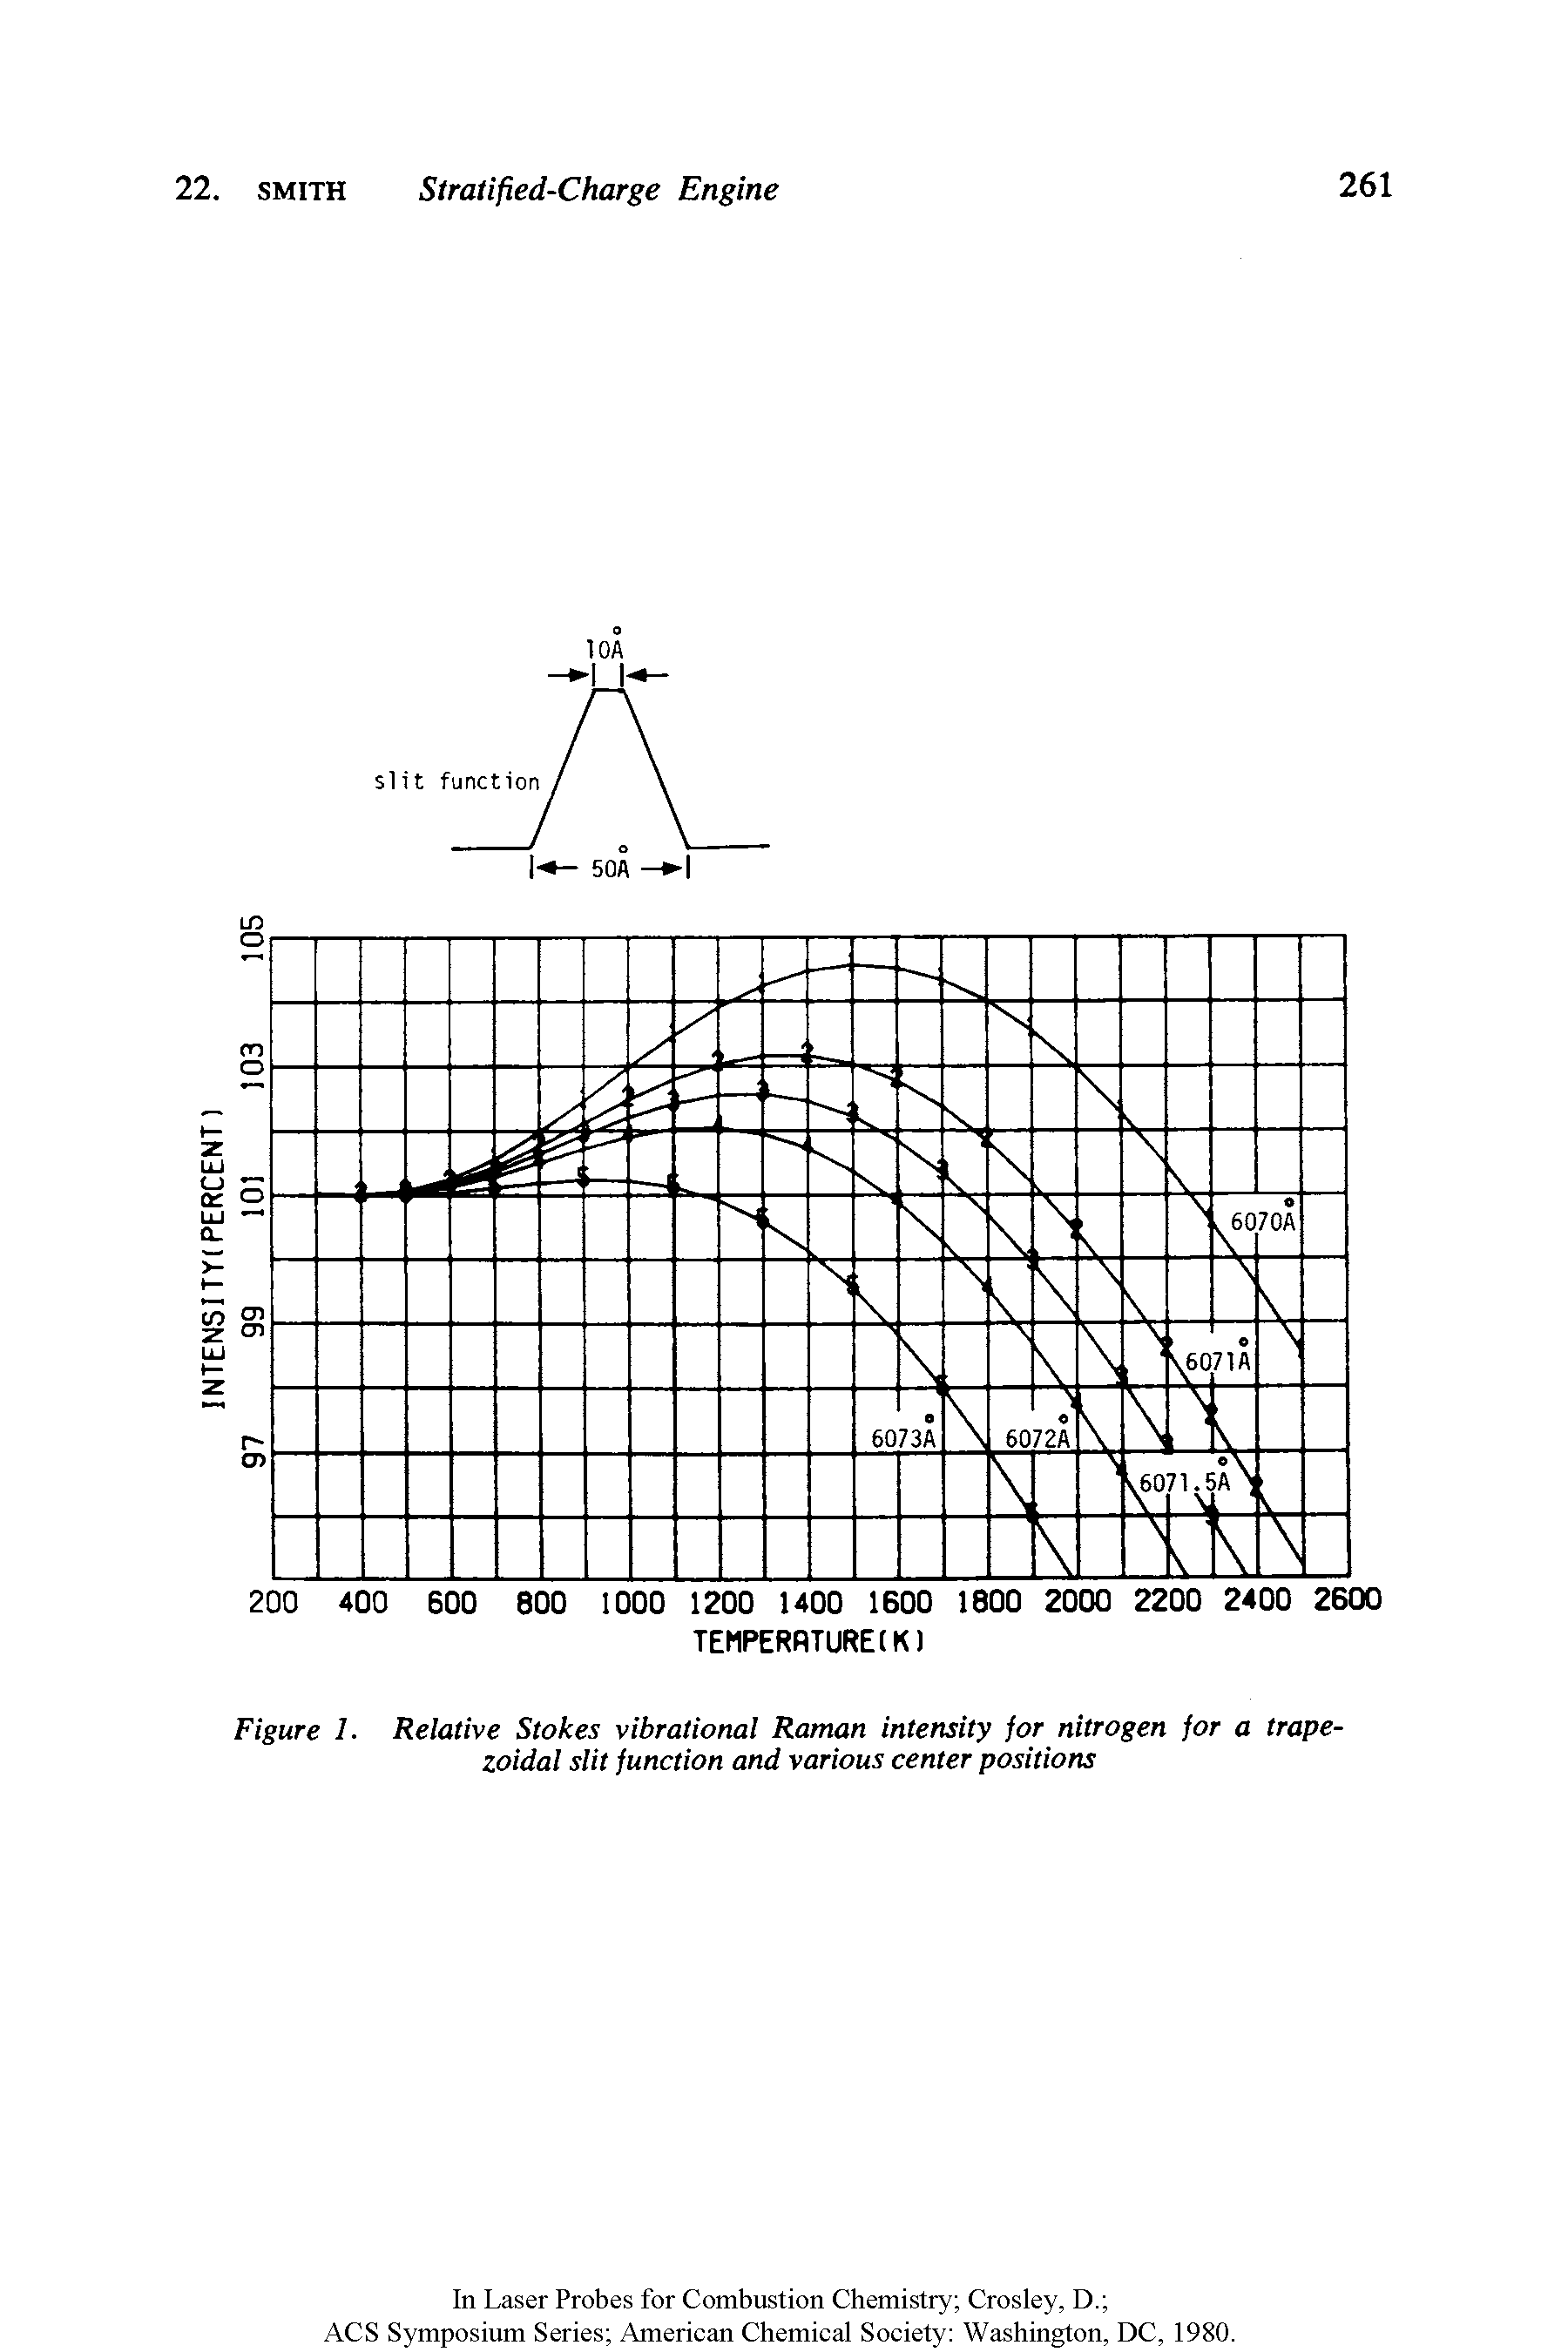 Figure 1. Relative Stokes vibrational Raman intensity jor nitrogen for a trapezoidal slit function and various center positions...